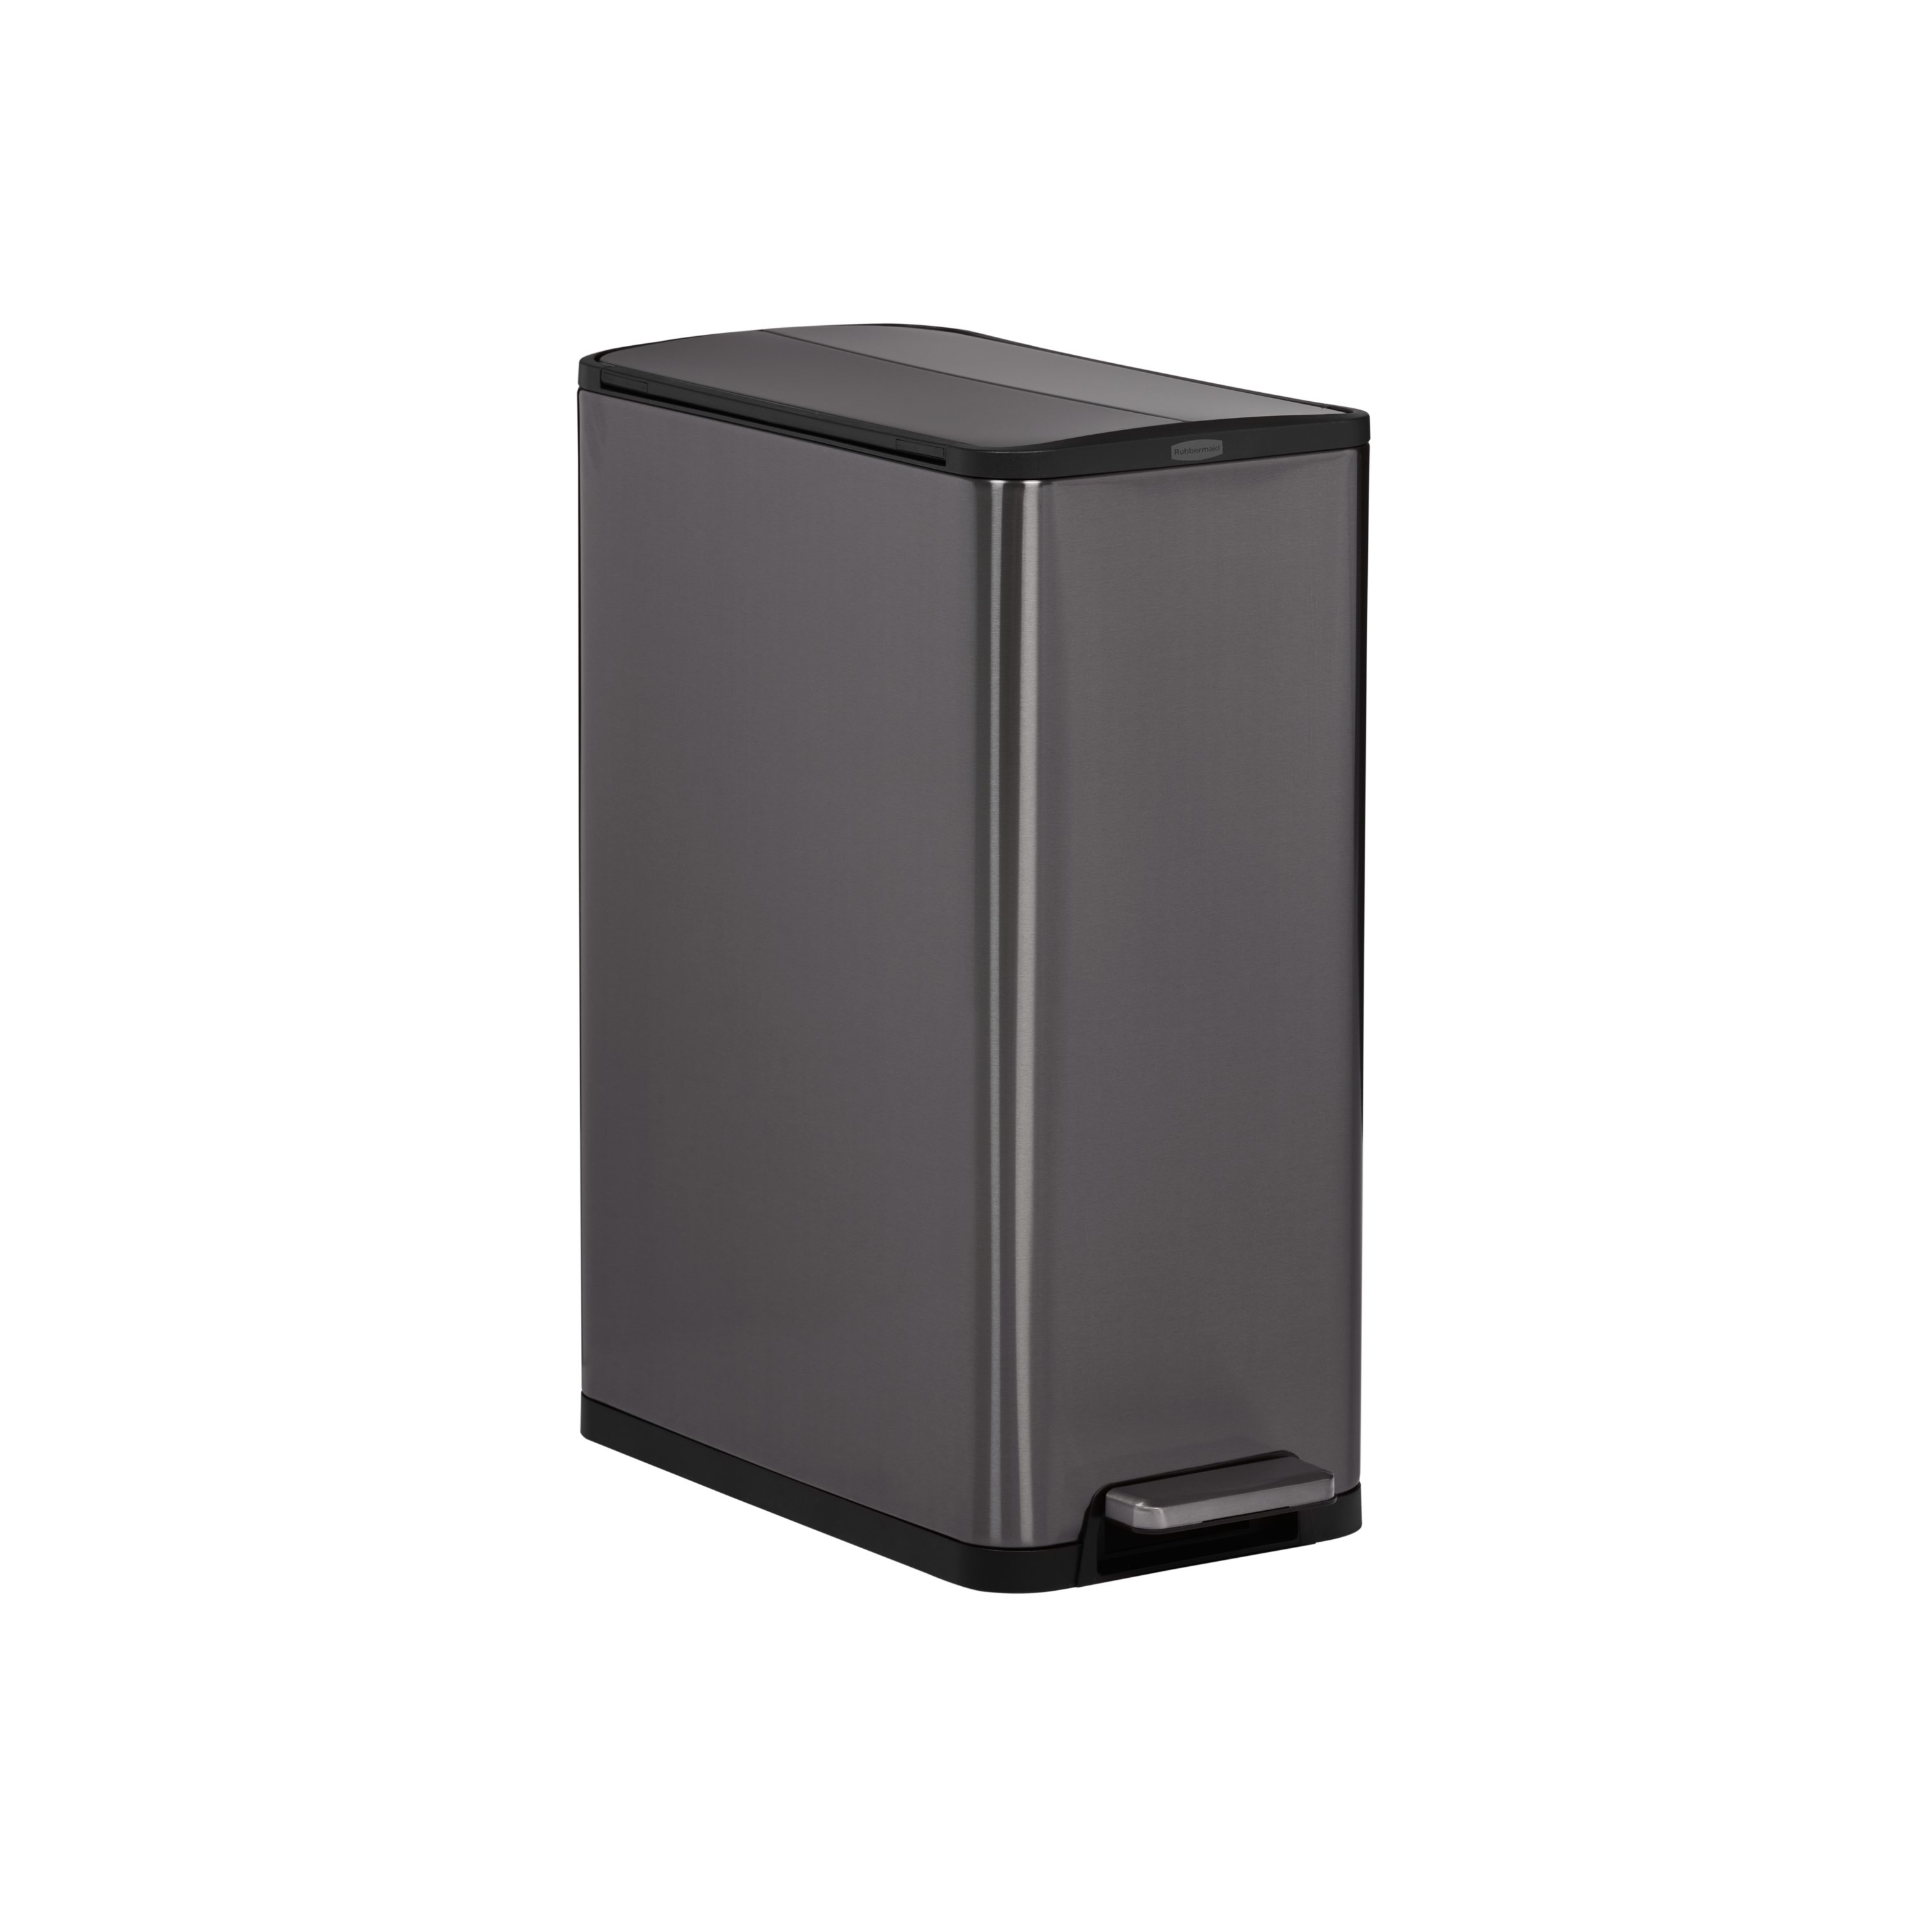 Rubbermaid 13 Gallon Step-On Trash Can in Black